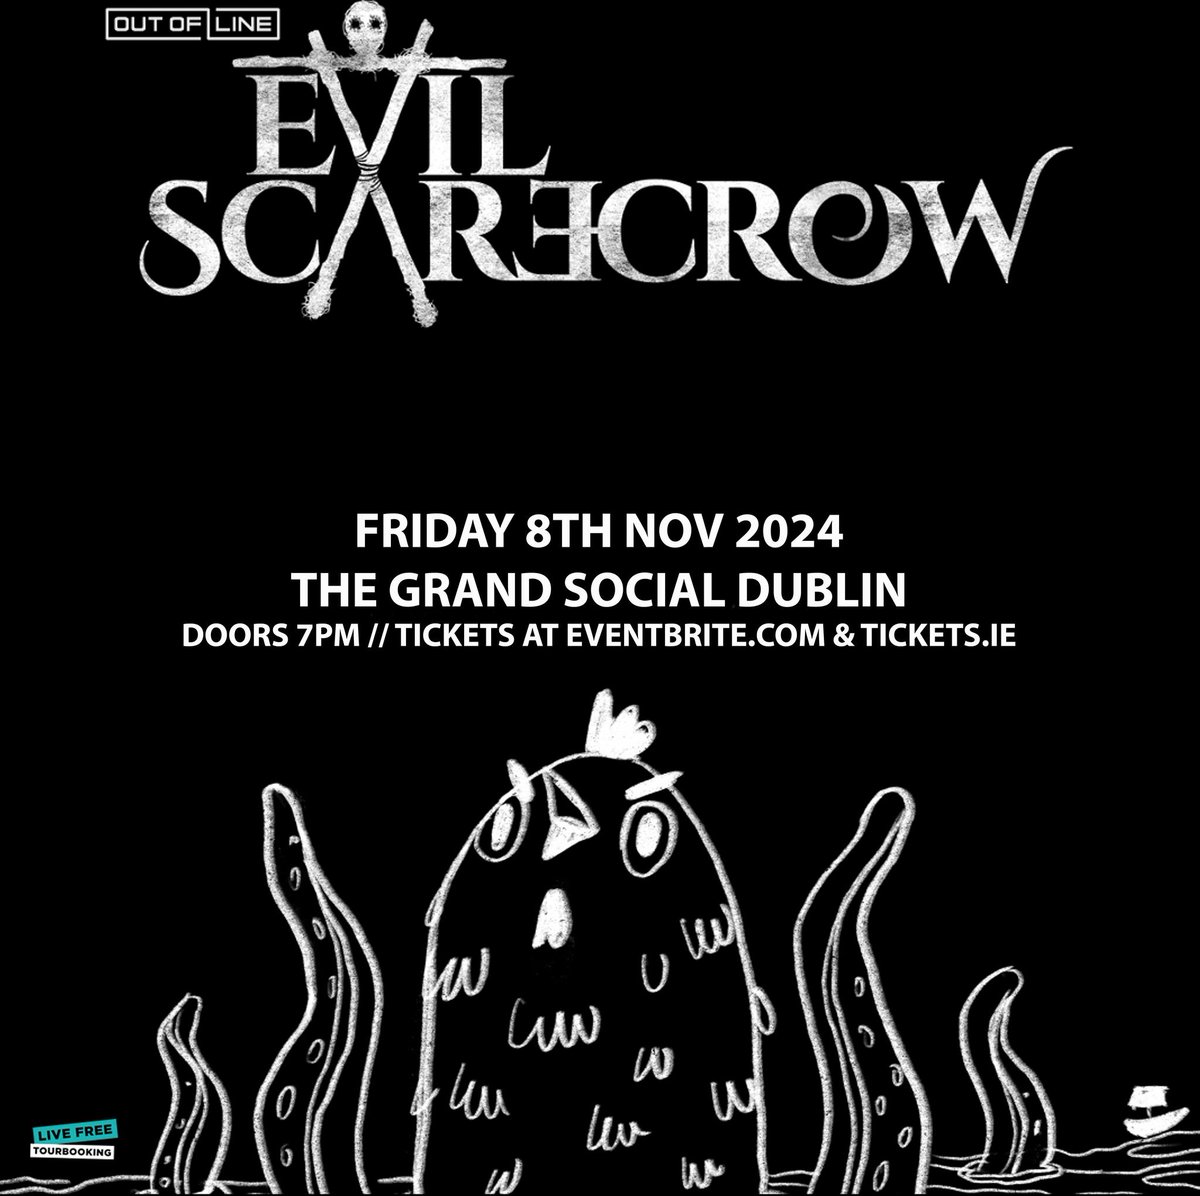 // 𝐍𝐄𝐖 𝐒𝐇𝐎𝐖 // @EvilScarecrowUK Friday 8th November The Grand Social Doors 7pm Tickets + more info thegrandsocial.ie #evil #heavy #tour #Dublin